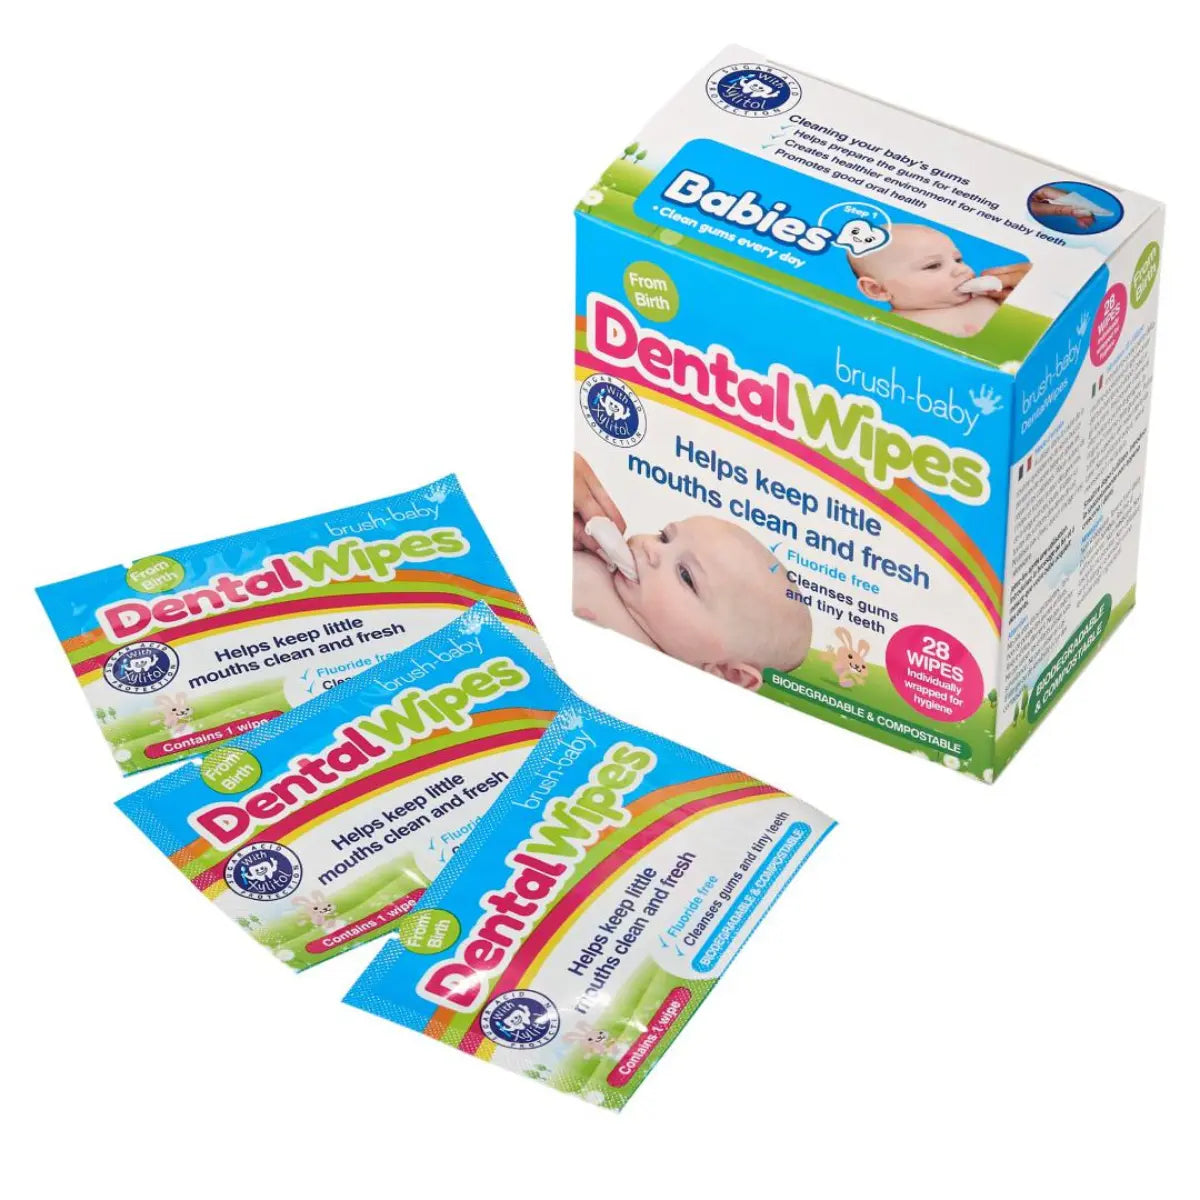 one box of baby dental wipes with a 3 single sachets of baby gum wipes